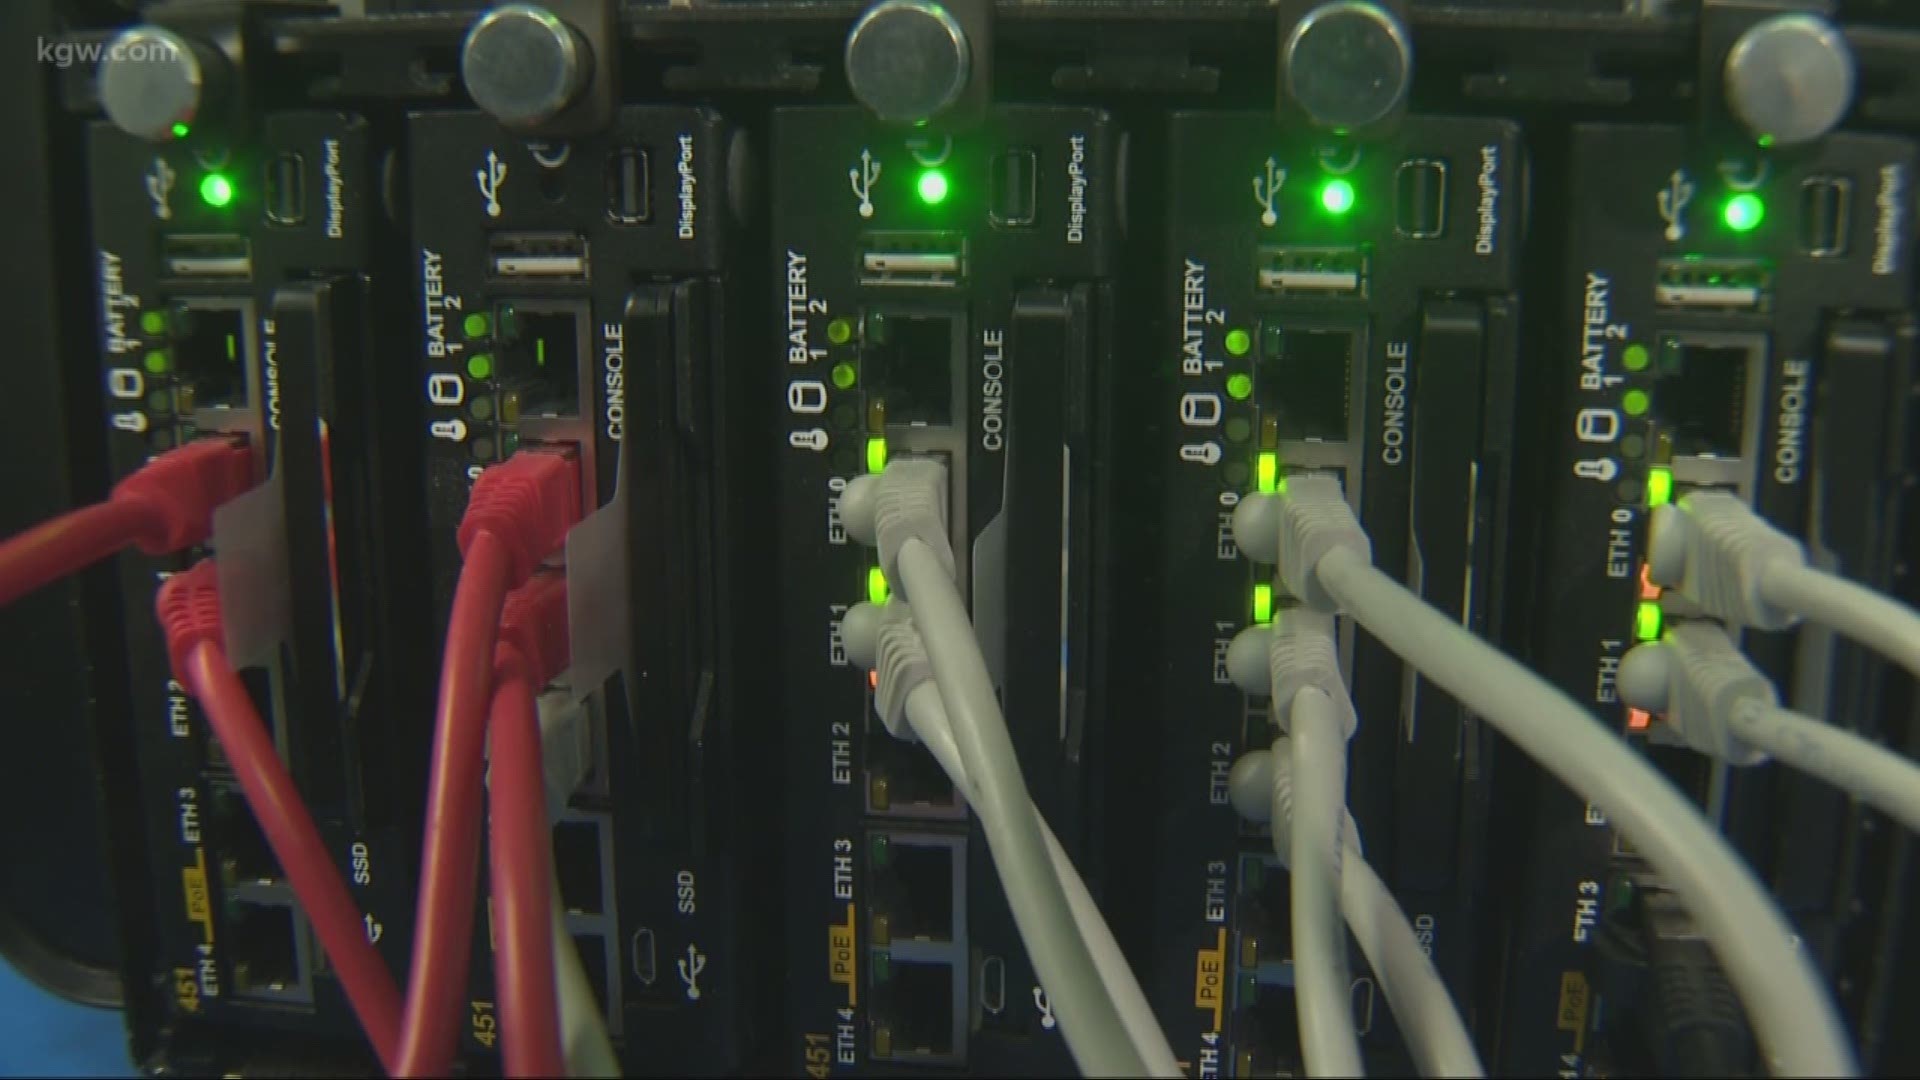 A local company gets military contracts for encrypted communications equipment.